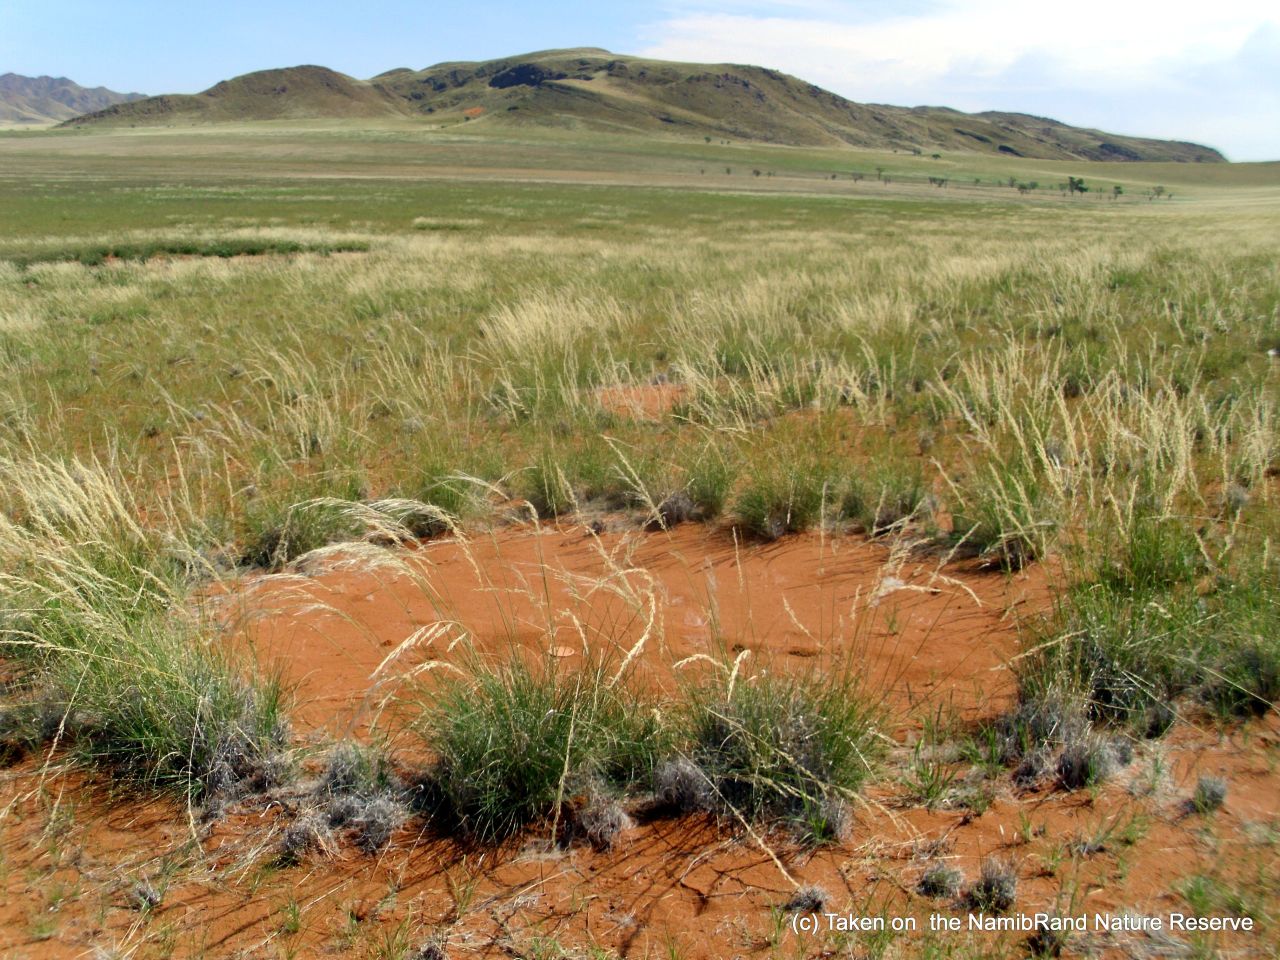 Plants surrounding the termites' territory are able to utilize the extra moisture through extensive root growth, growing taller vegetation than their neighbors in drier soil.